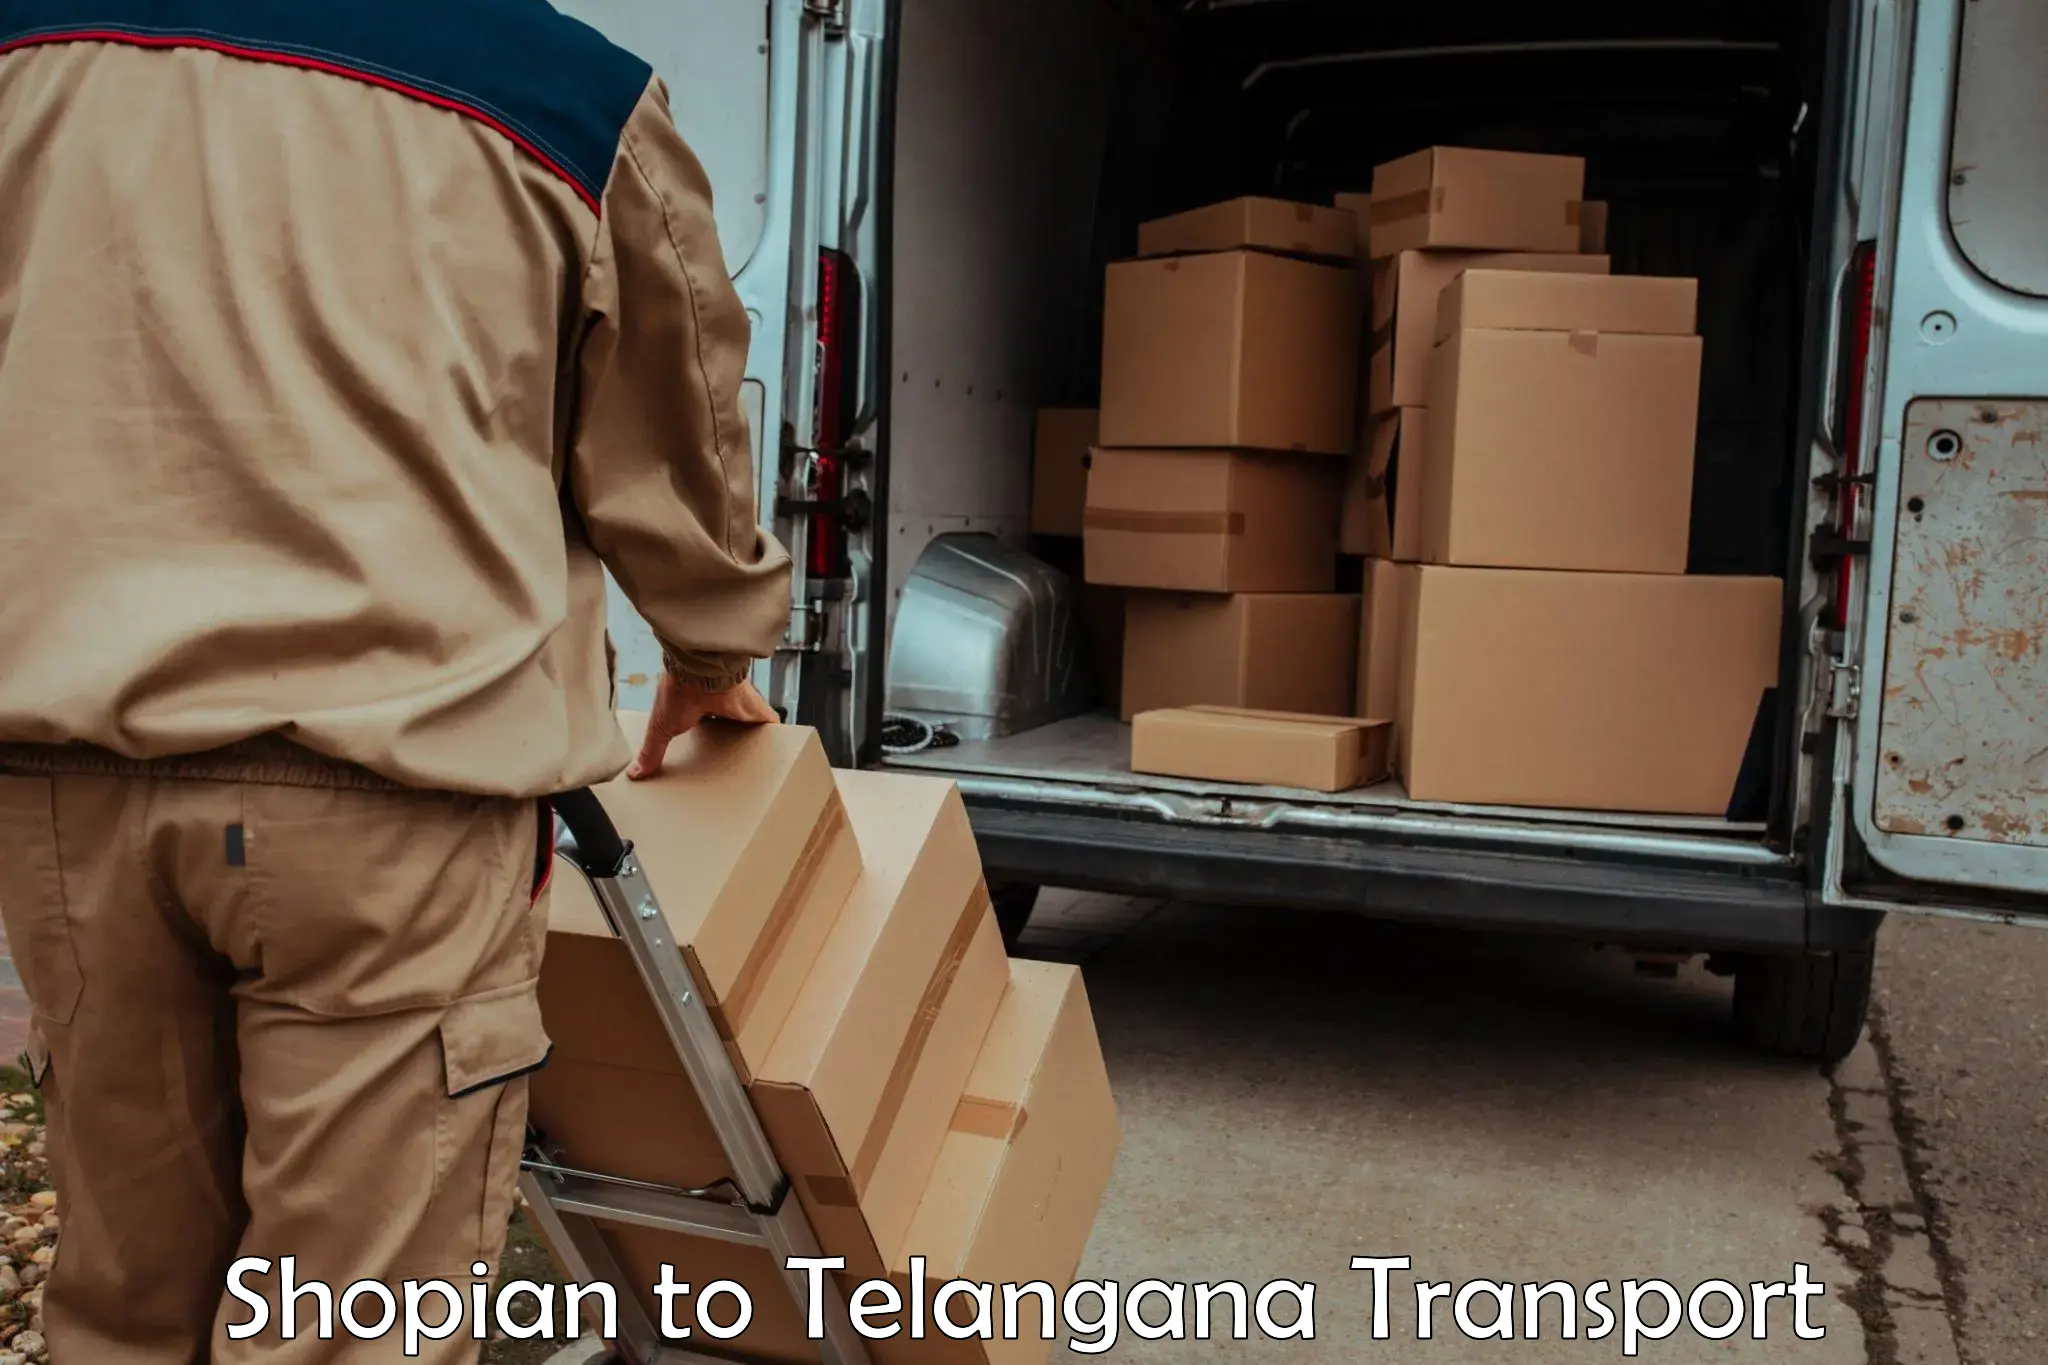 Truck transport companies in India Shopian to Metpally